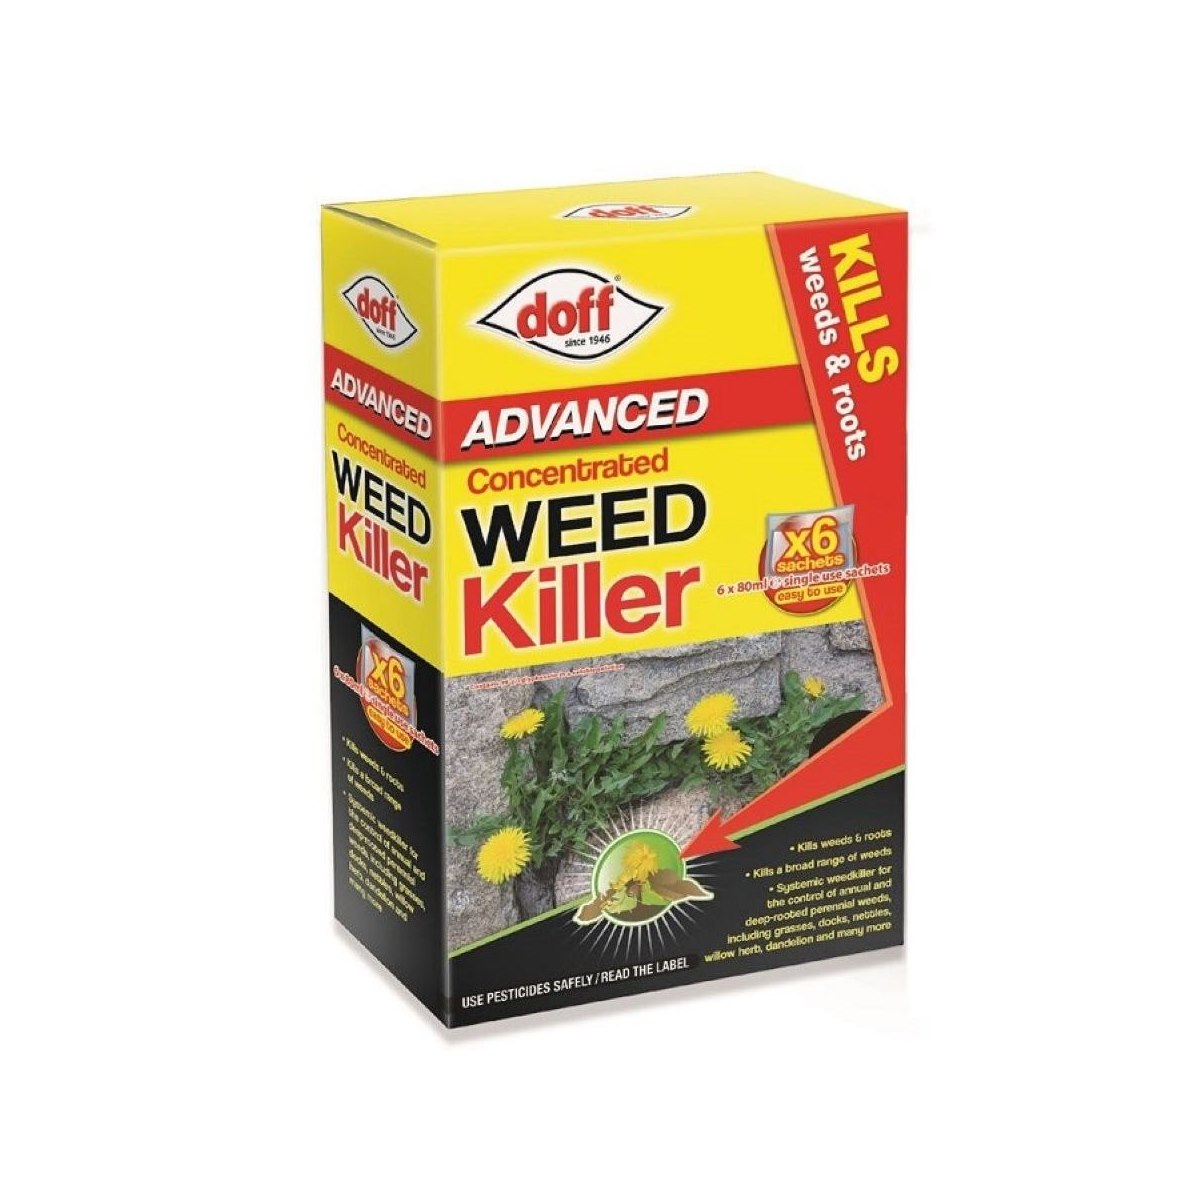 Doff Advanced Concentrated Weedkiller 6 x 80ml